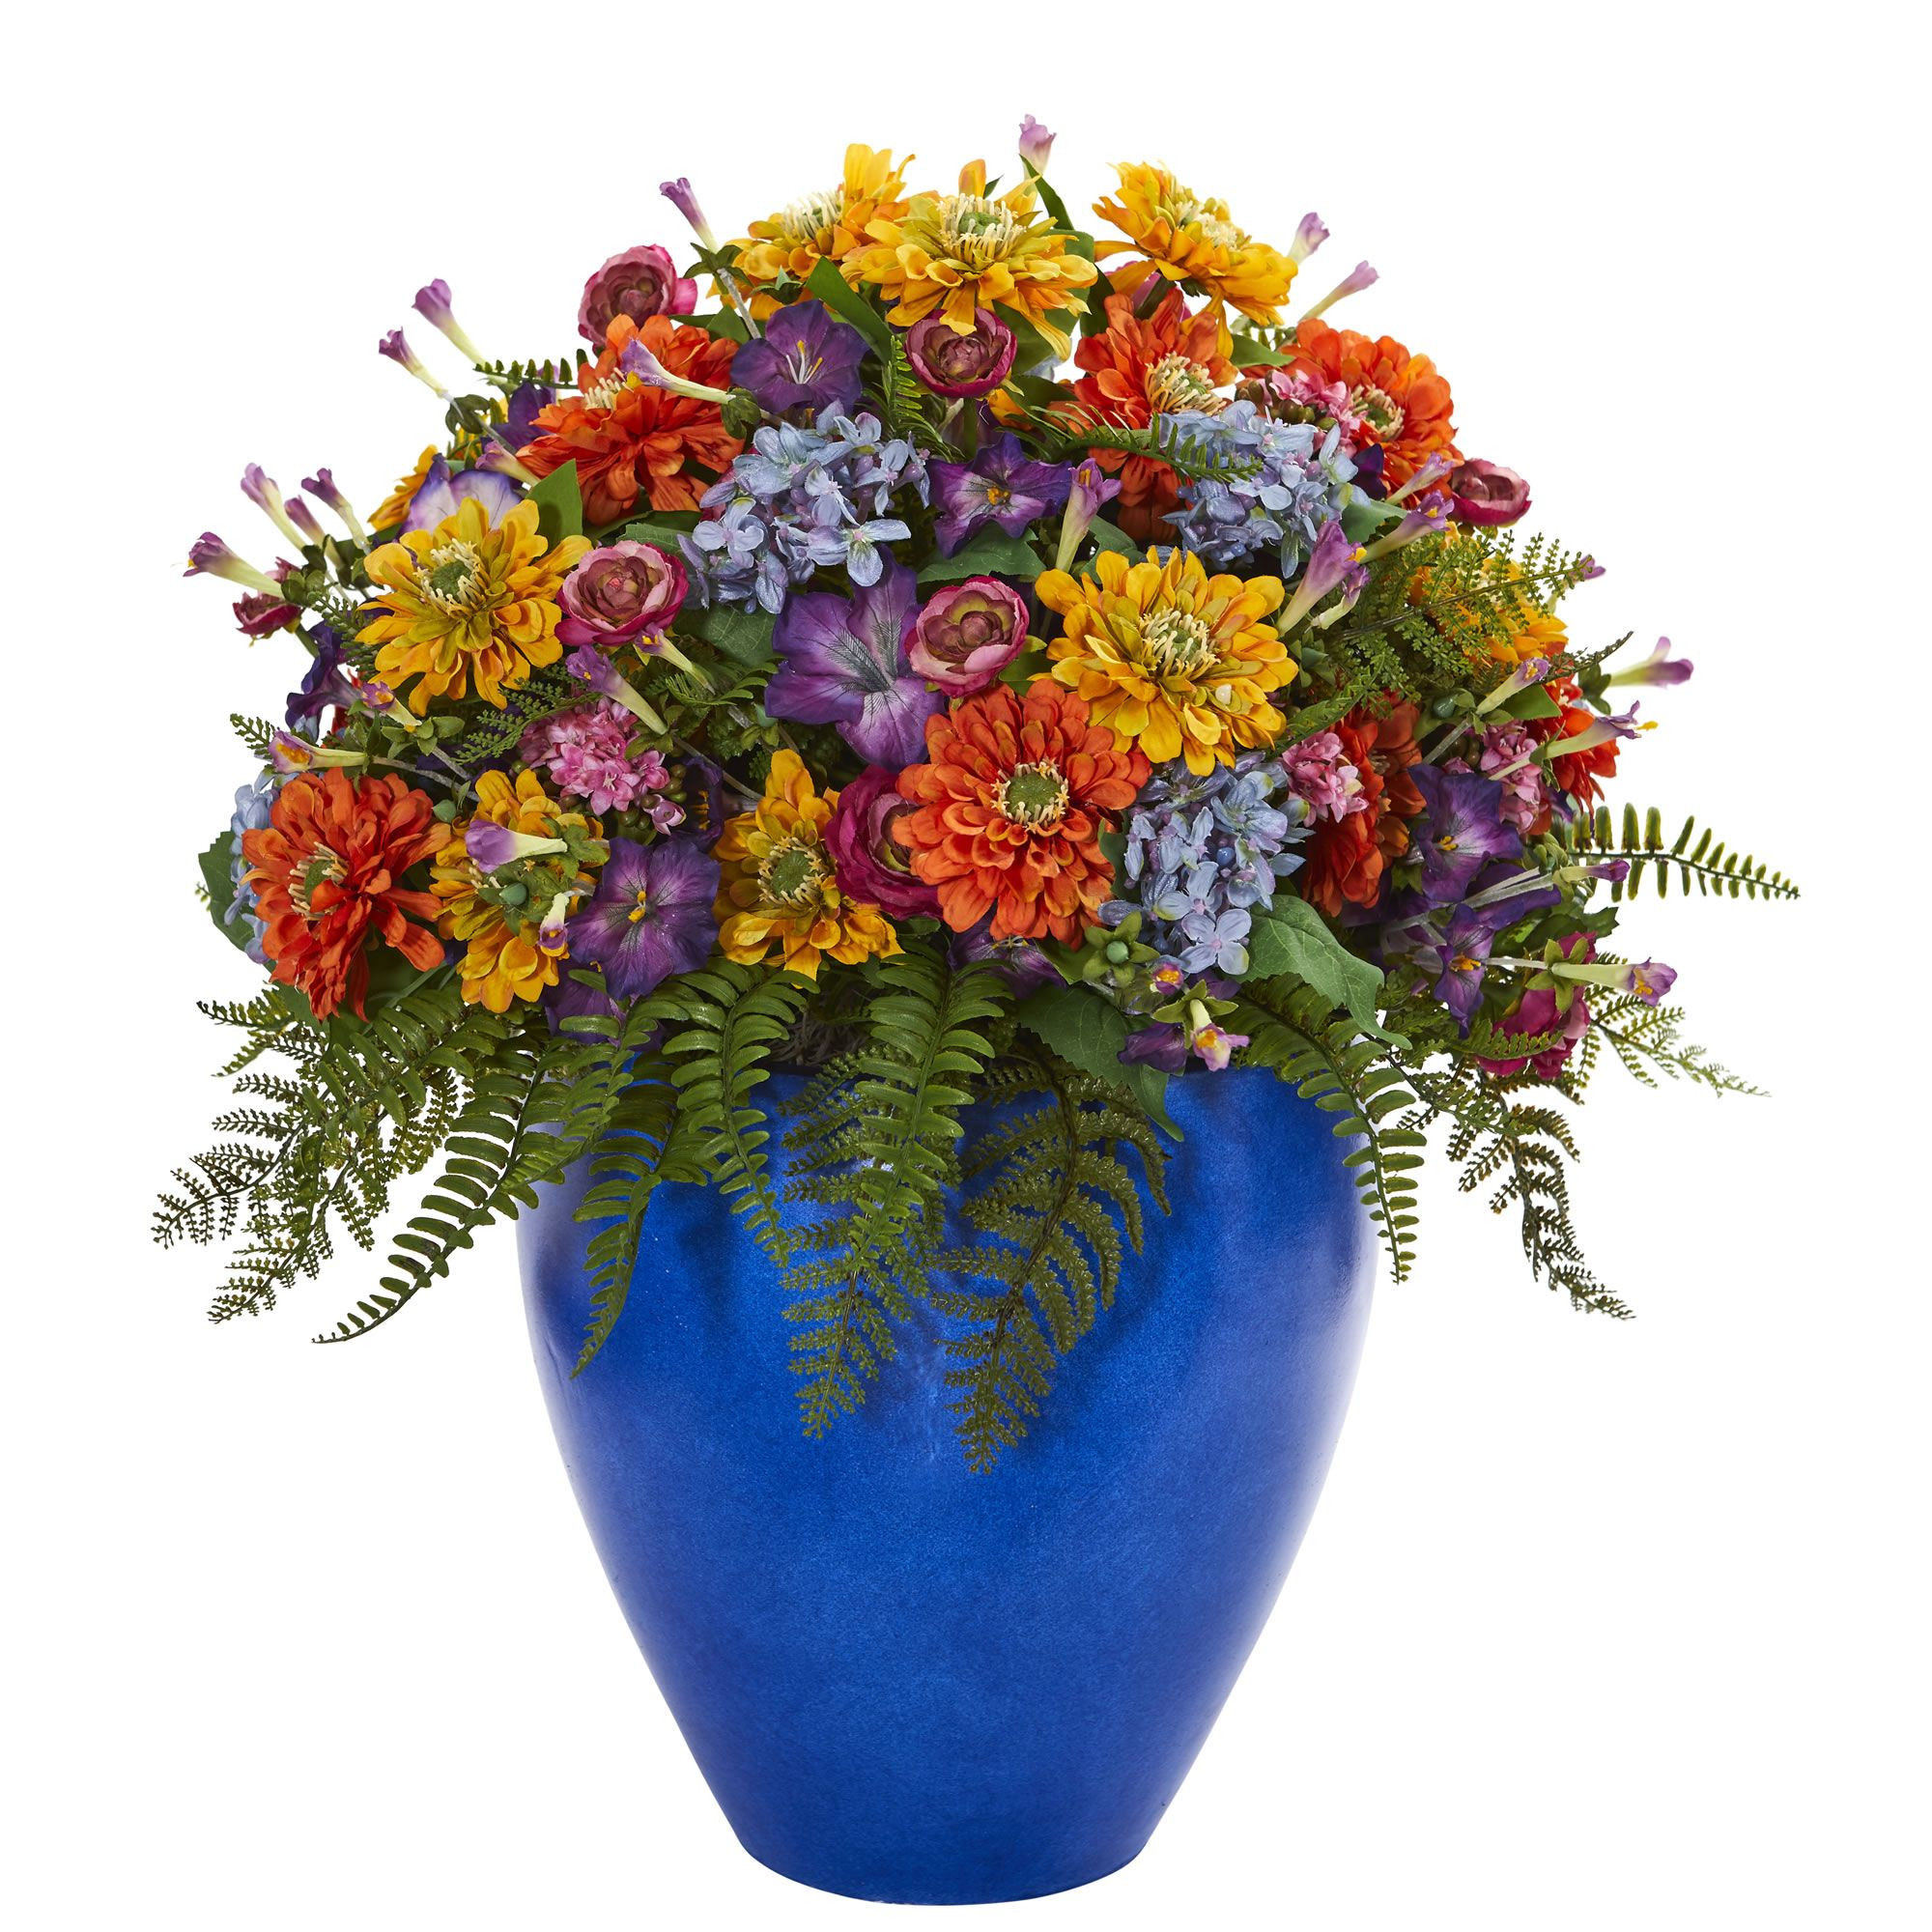 25 attractive Vase and Faux Flowers 2022 free download vase and faux flowers of 24 h giant mixed floral artificial arrangement in blue vase blue in 24 h giant mixed floral artificial arrangement in blue vase faux trees n shrubs